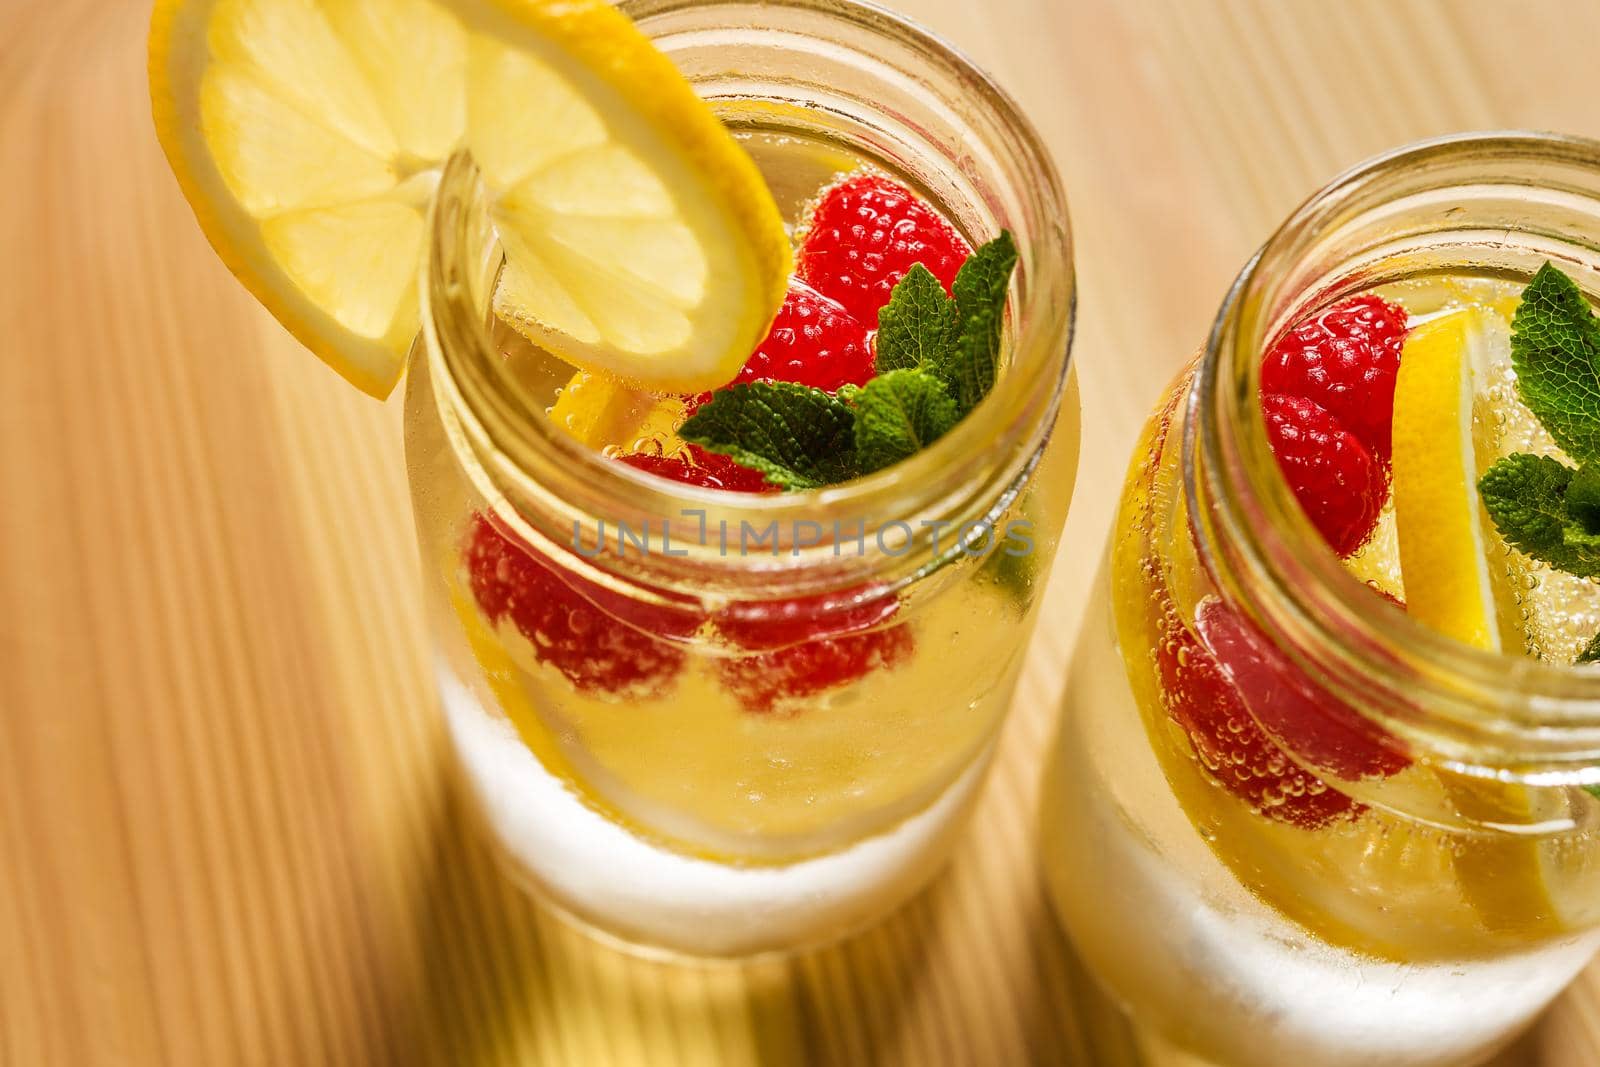 two glass jars with cold water, lemon slices, mint leaves and red berries seen from above, illuminated by sunlight on a wooden table, citrus summer refreshments background, copy space